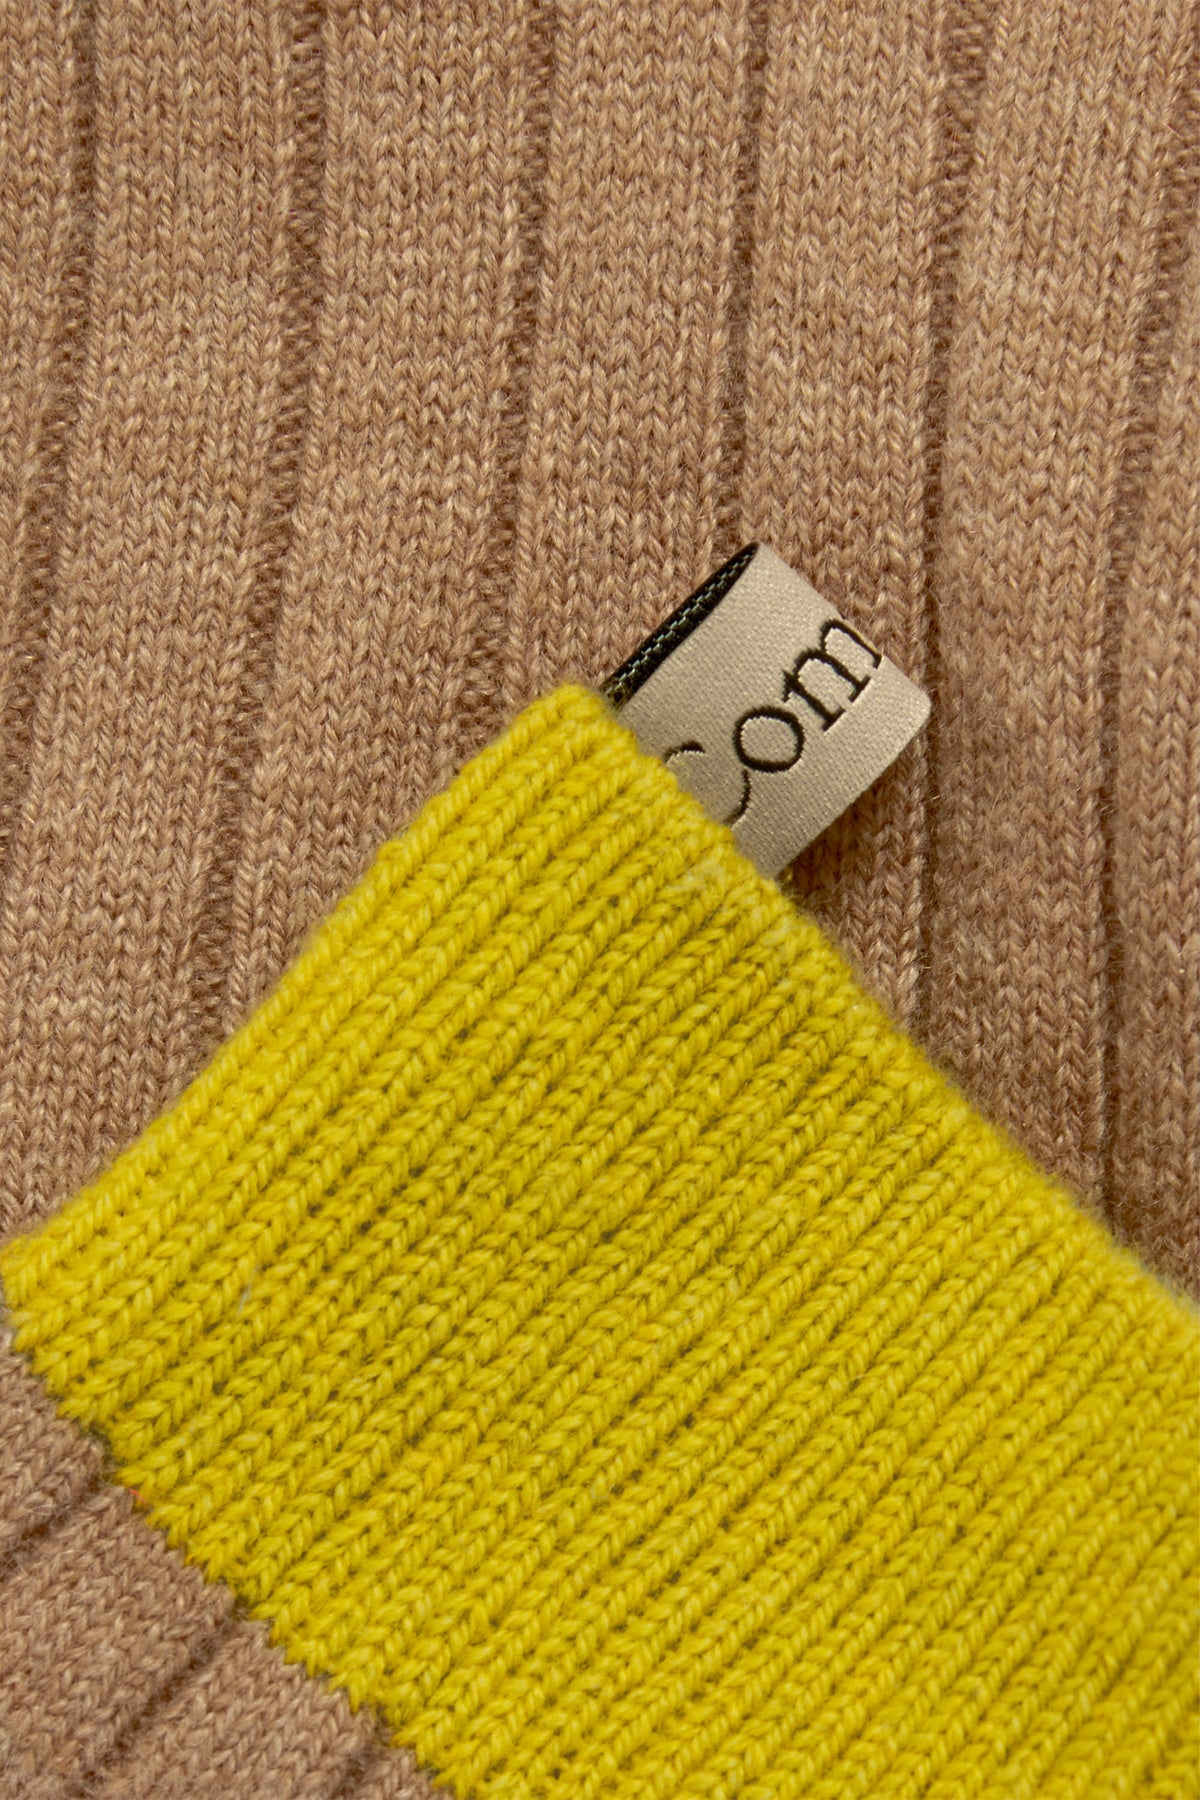 The Cashmere Sock, Color Block – Comme Si